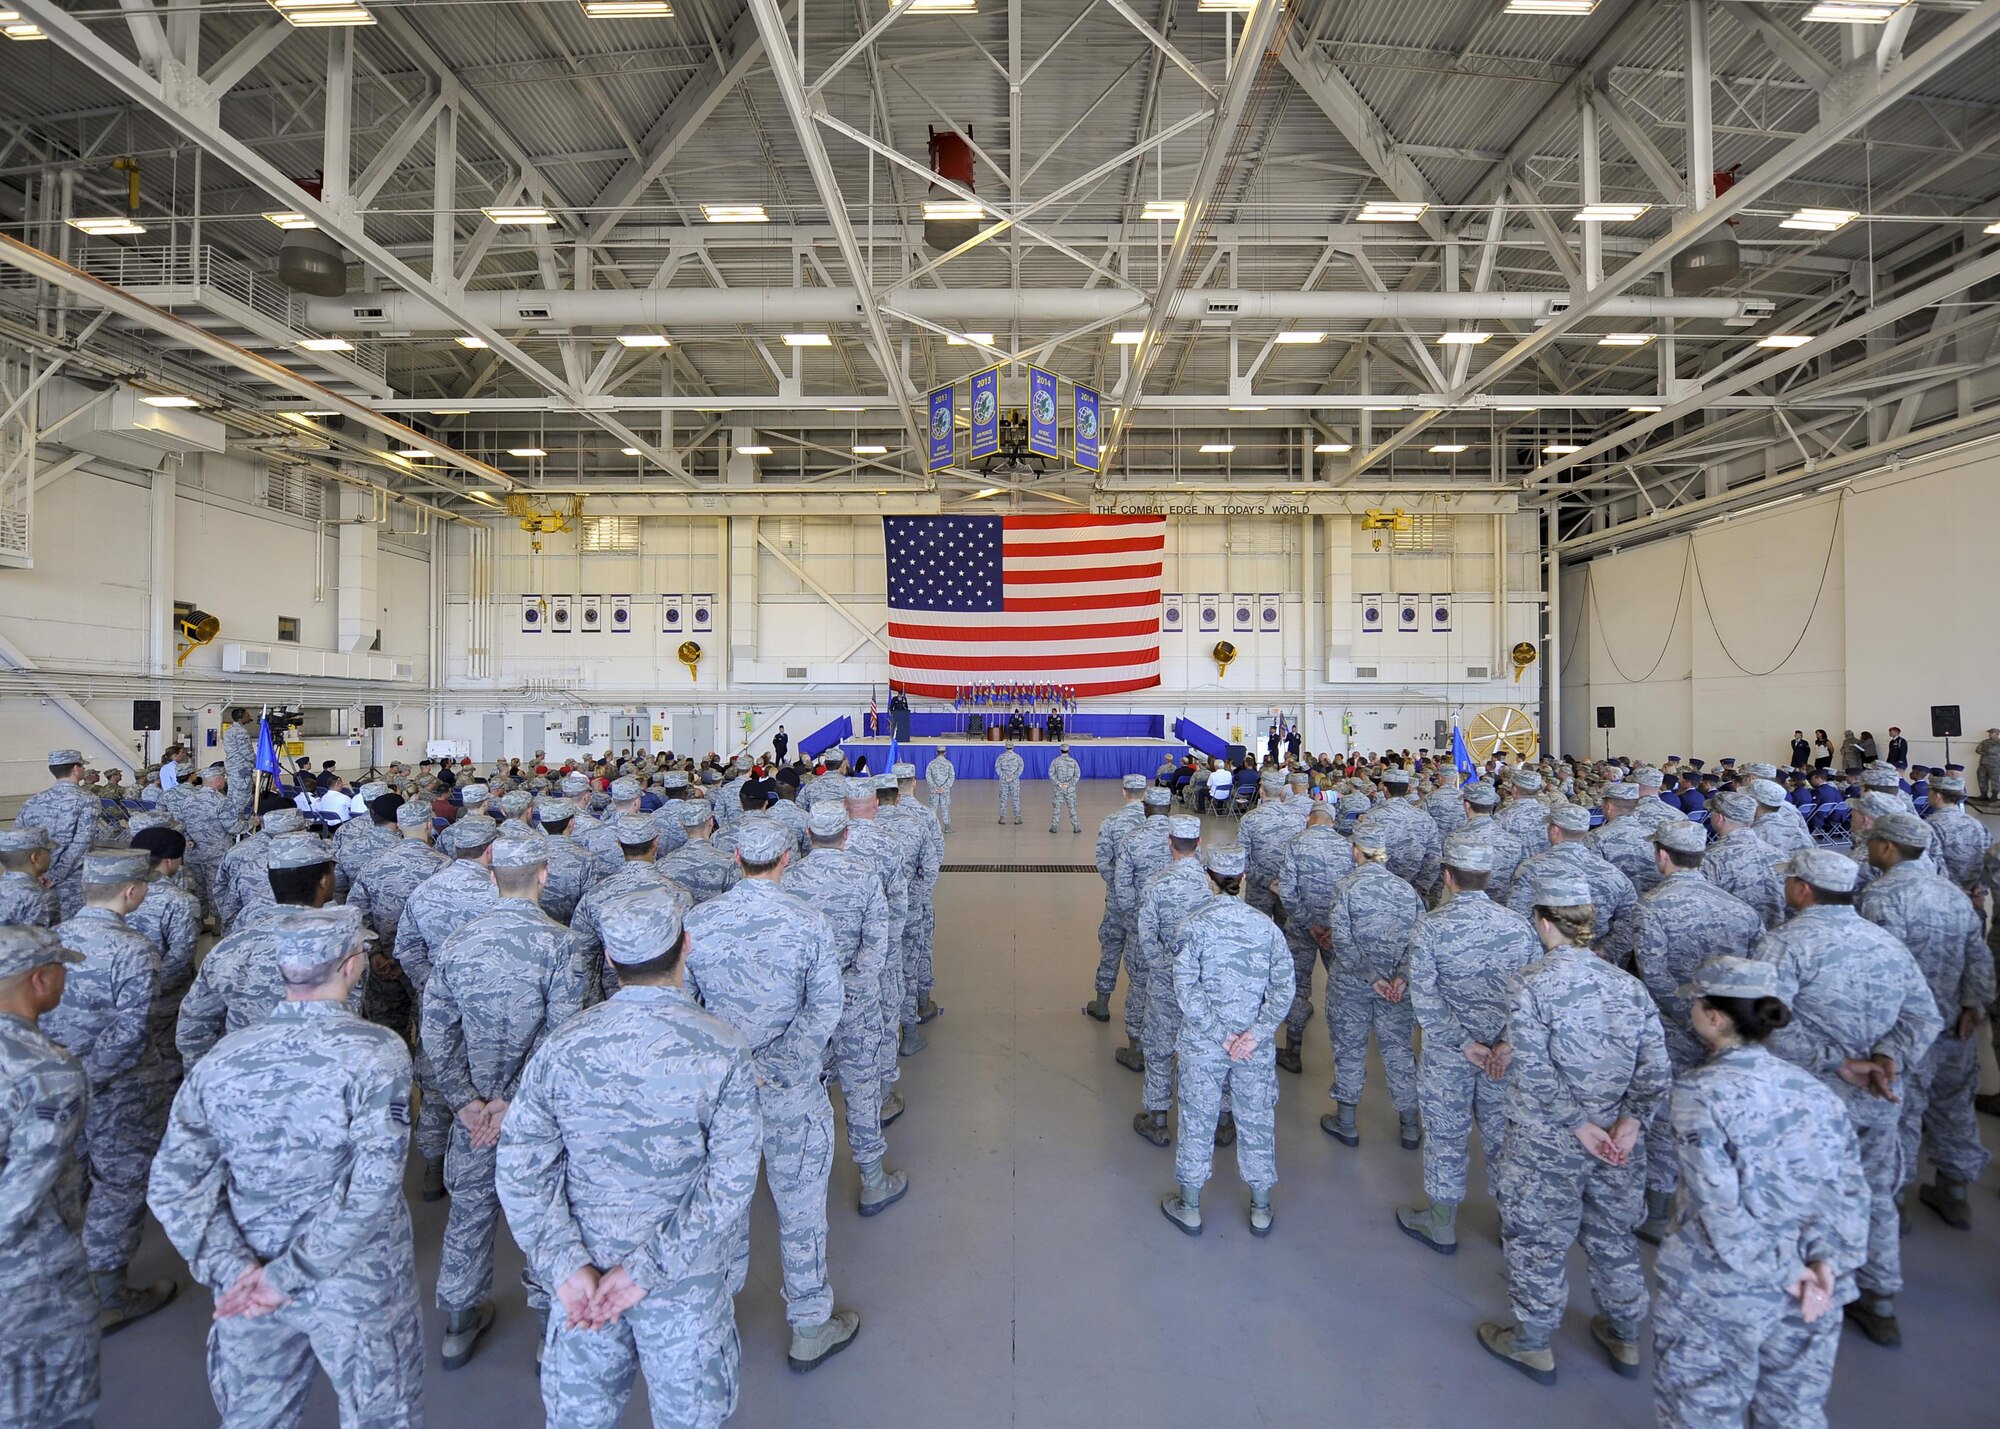 Lt. Gen. Brad Heithold, commander of Air Force Special Operations Command, addresses 1st SOW Air Commandos during a change of command ceremony at Hurlburt Field, Fla., June 10, 2016. Col. Sean Farrell, former commander of the 1st SOW, relinquished command to Col. Tom Palenske, former vice commander of the 1st SOW, after commanding the wing for more than 18 months and employing more than 5,000 Air Commandos who executed 30,900 combat flight hours. (U.S. Air Force photo by Airman 1st Class Kai White)